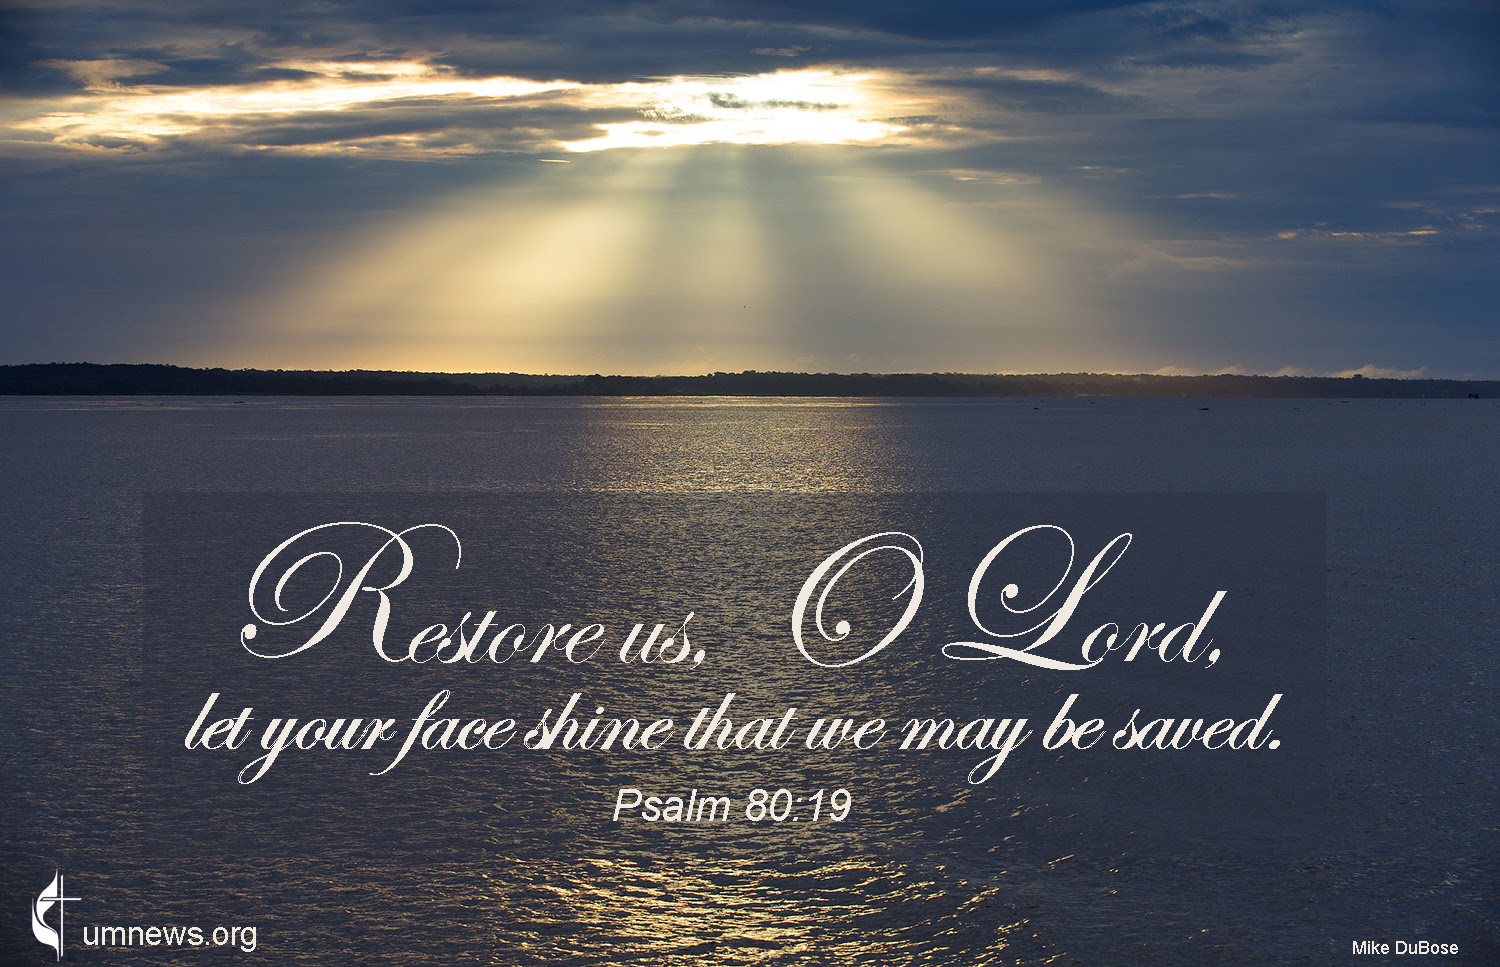 United Methodist  lectionary for August 2022. Psalm 80:19. Photo by Mike DuBose, UM News graphic by Laurens Glass.